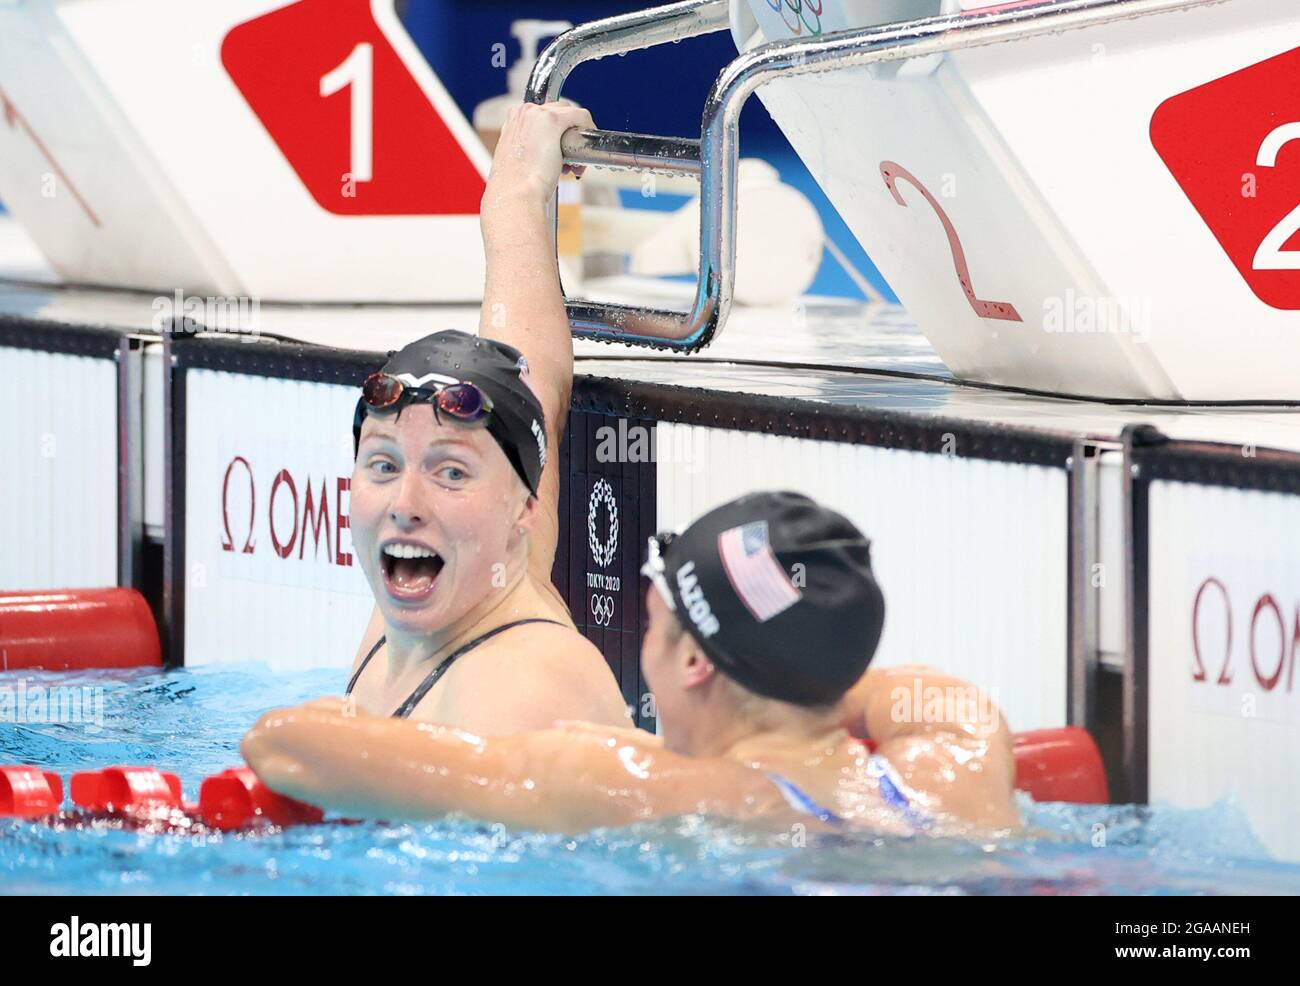 Tokyo, Japan. 30th July, 2021. Annie Lazor (R) and Lilly King of the United States celebrate after the women's 200m breaststroke final of swimming at the Tokyo 2020 Olympic Games in Tokyo, Japan, July 30, 2021. Credit: Ding Xu/Xinhua/Alamy Live News Stock Photo